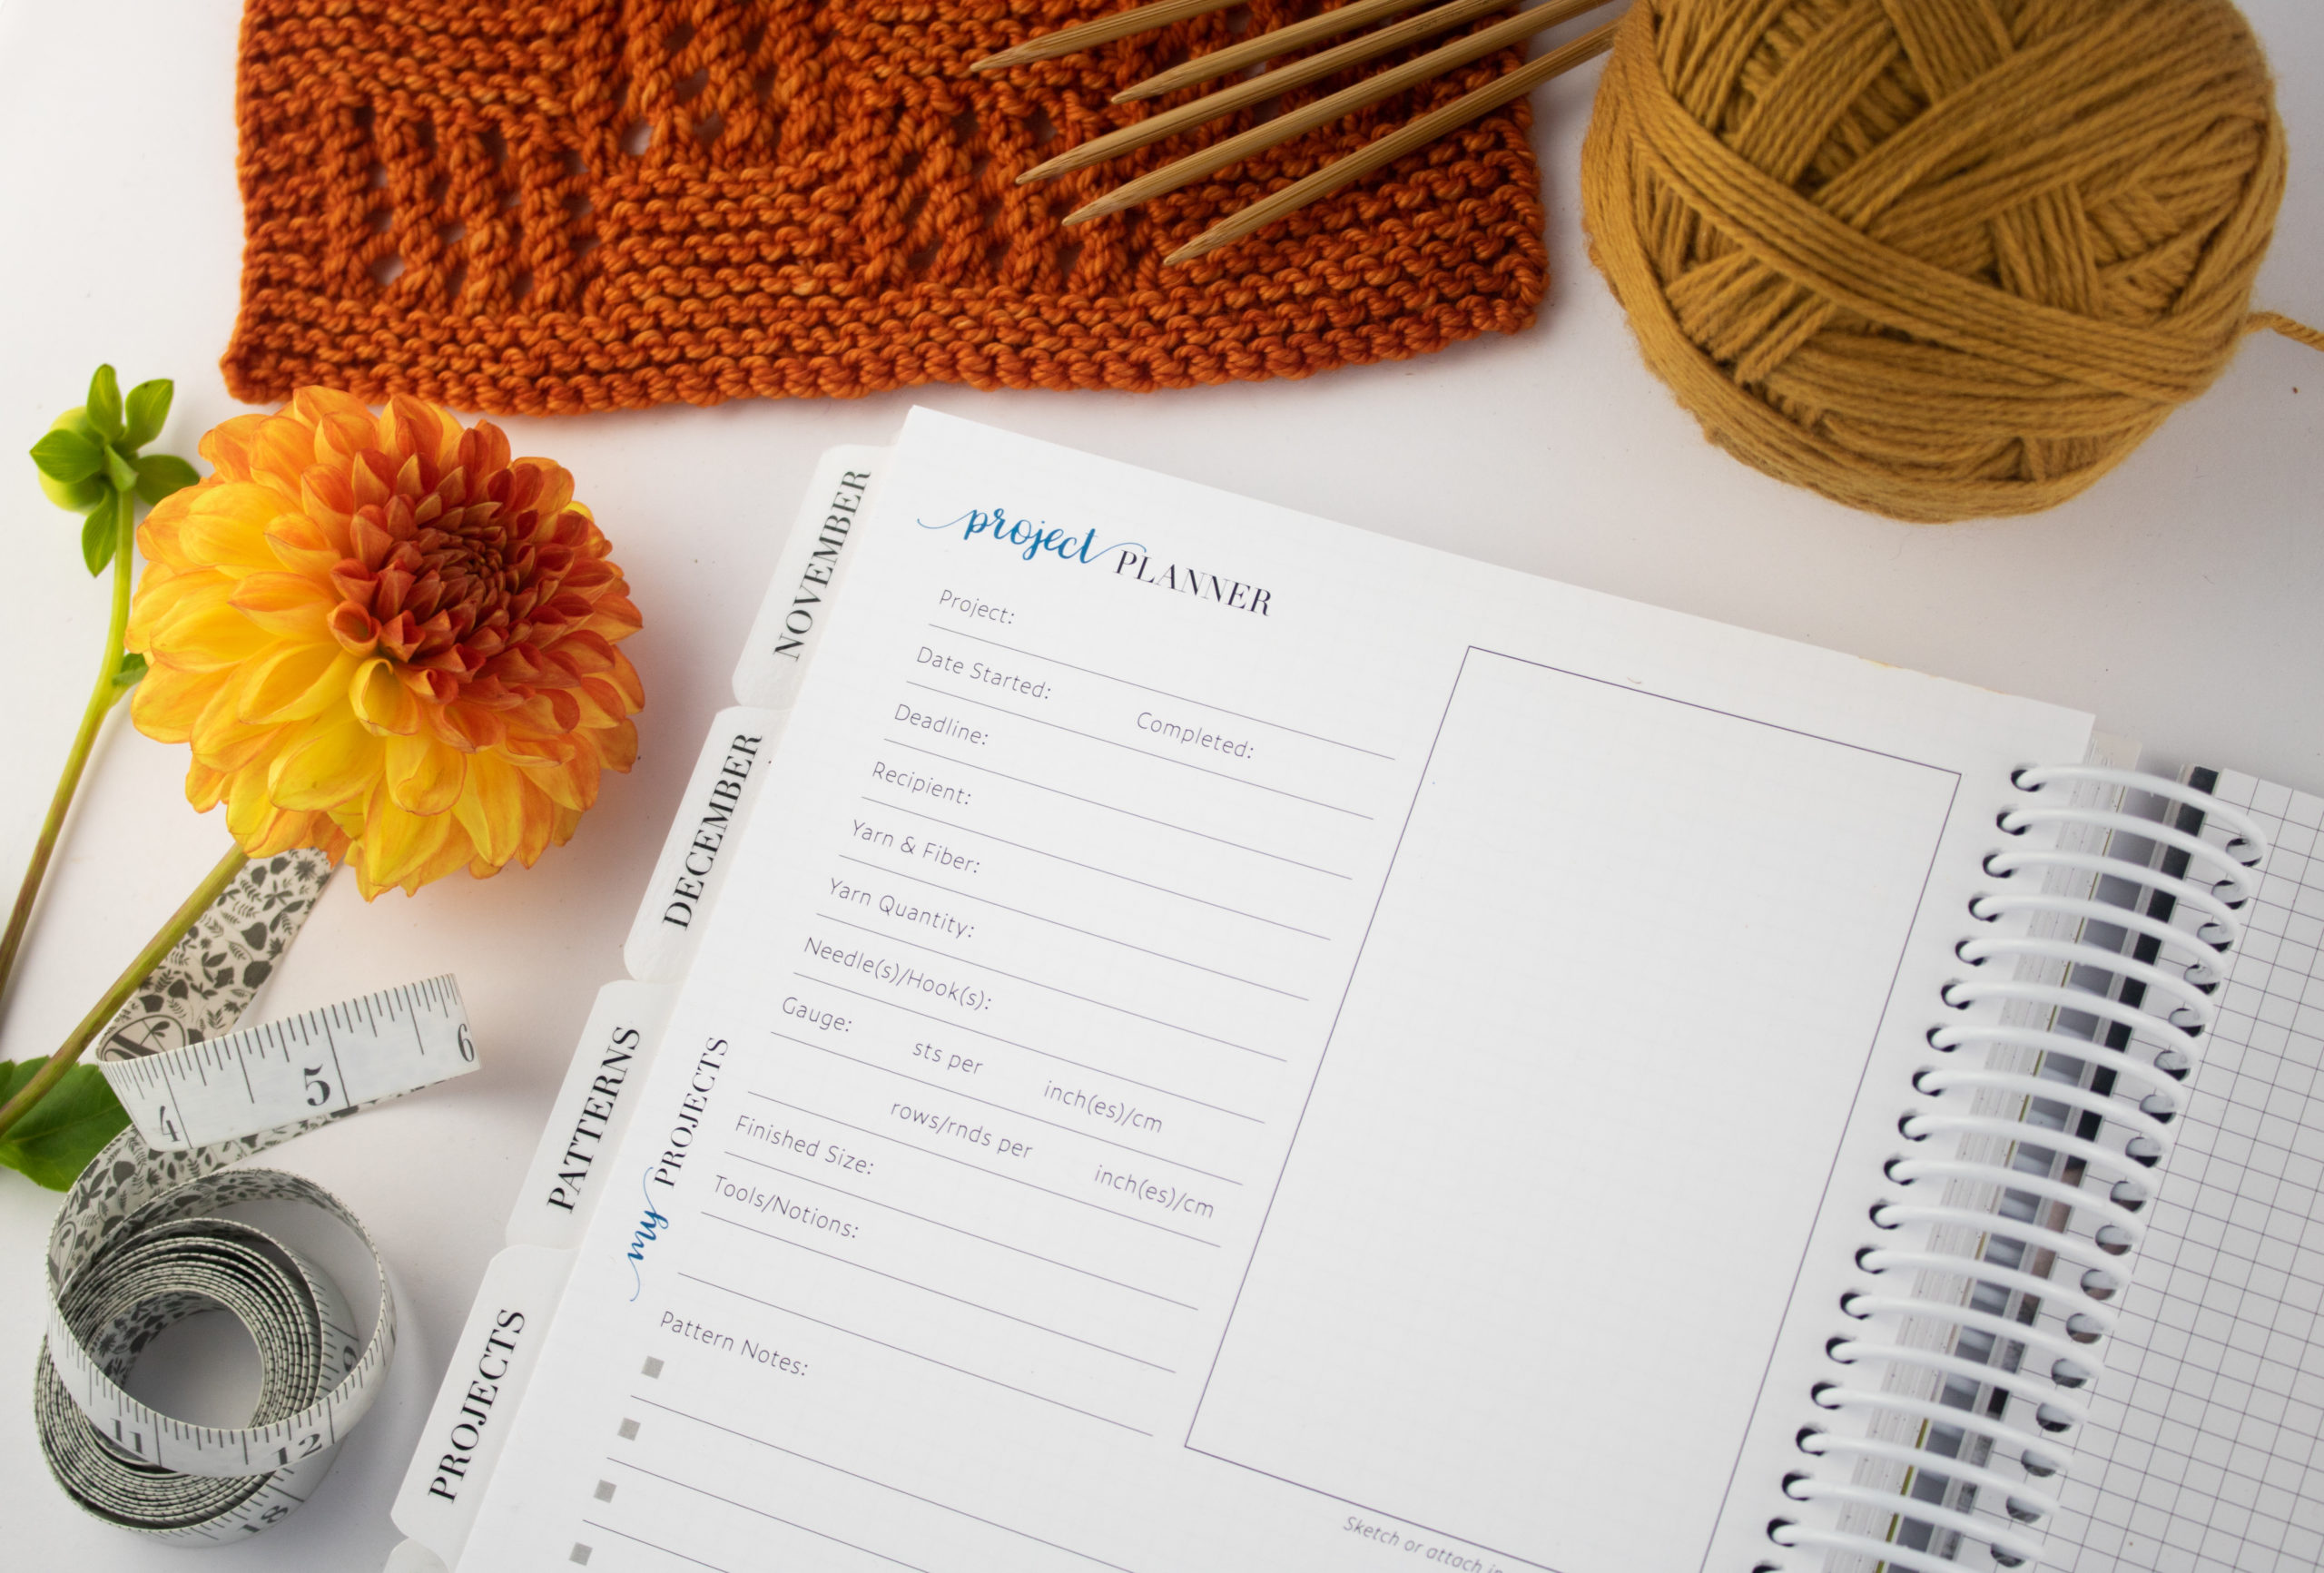 The Knitter's Planner Project planner page with orange swatch and yellow yarn